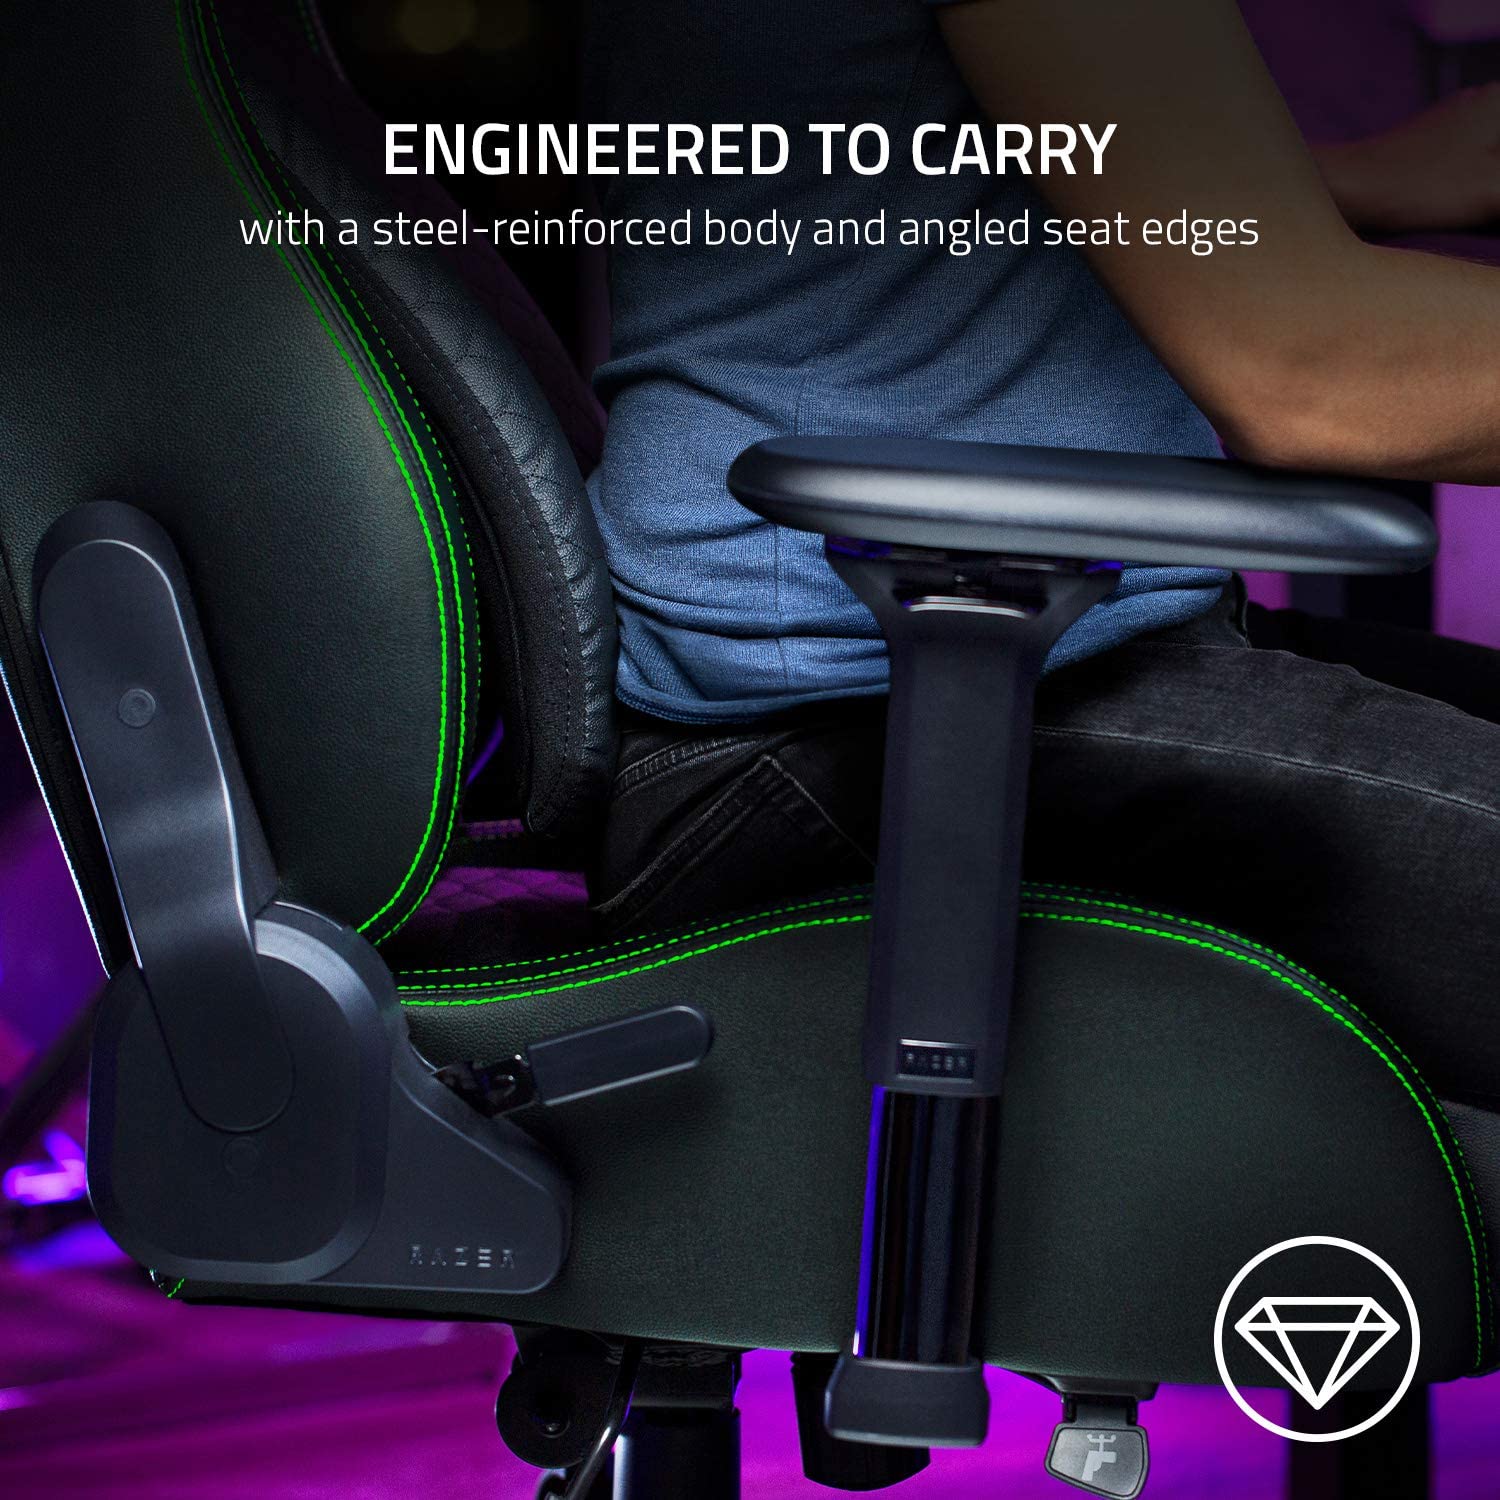 Razer Iskur Gaming Chair With Built-In Lumbar Support - Black